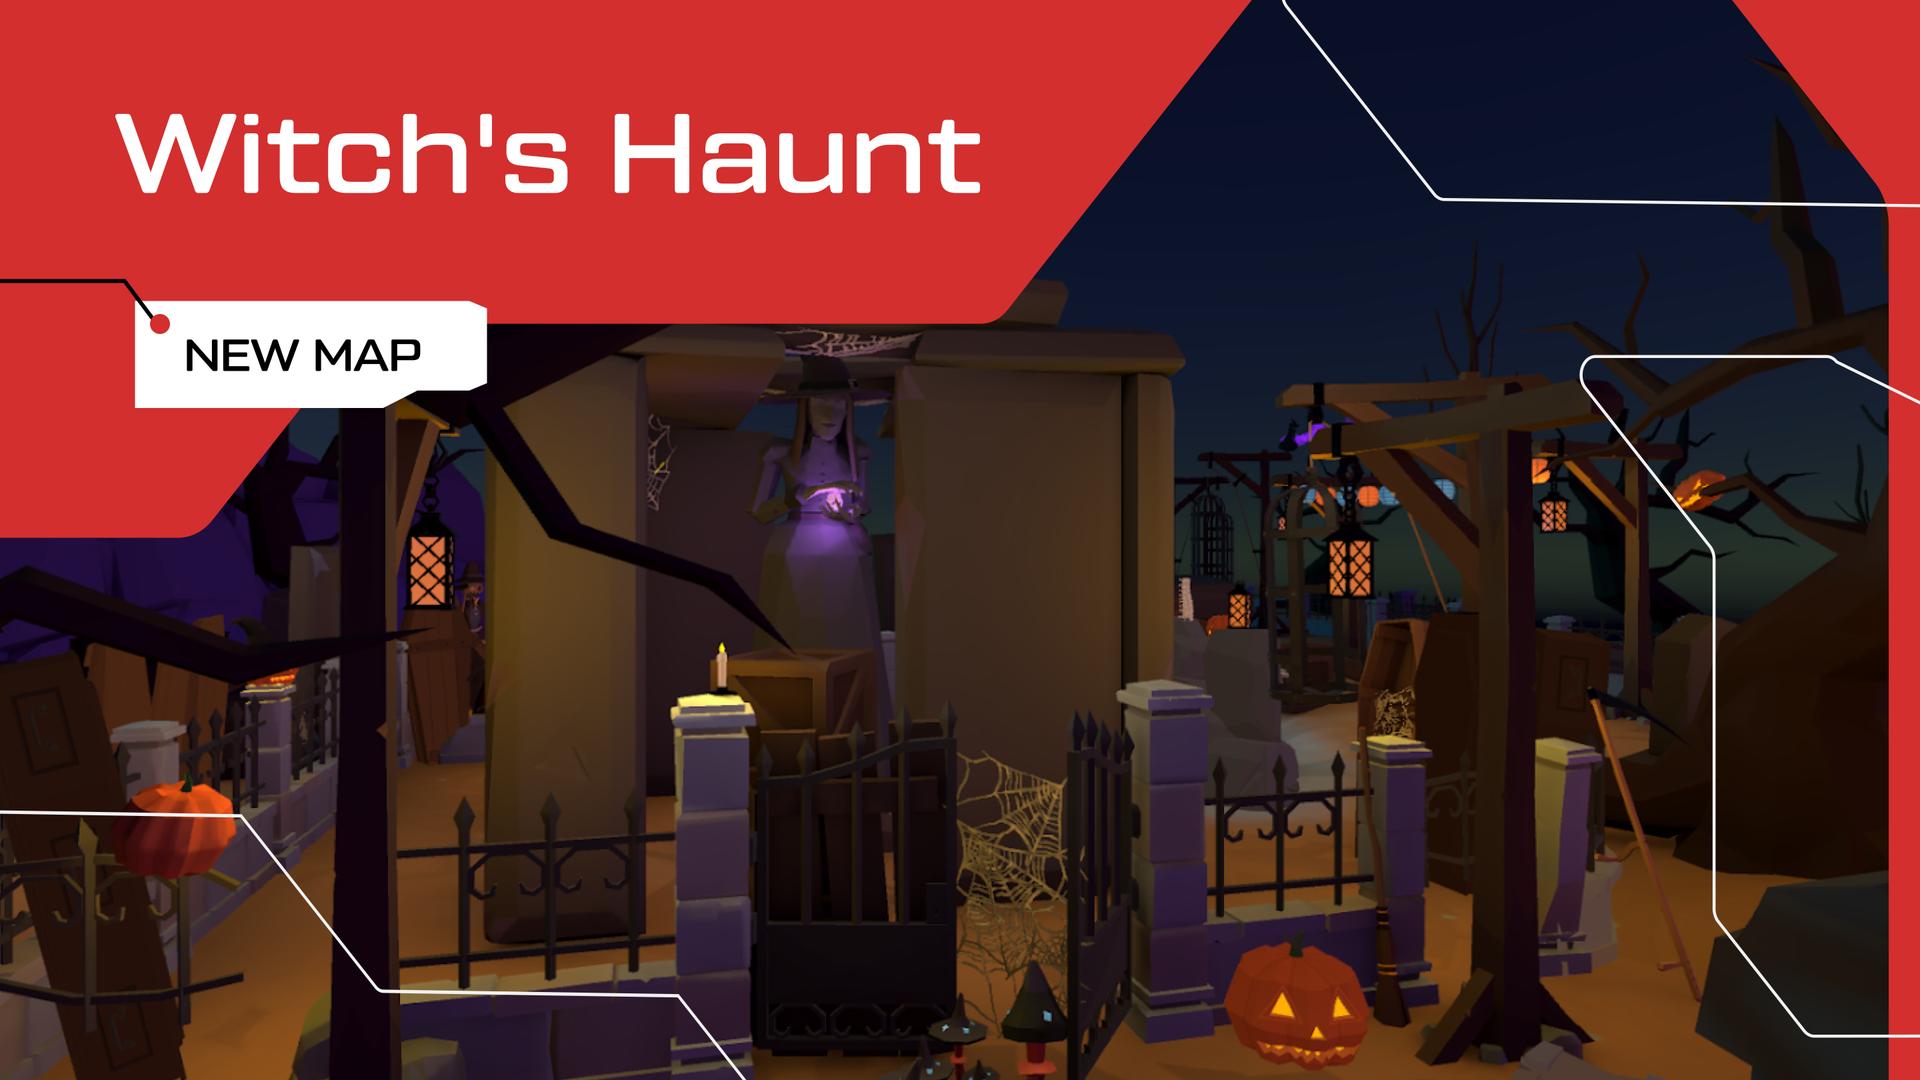 Introducing the New "Witch's Haunt" VR Map by VION VR'